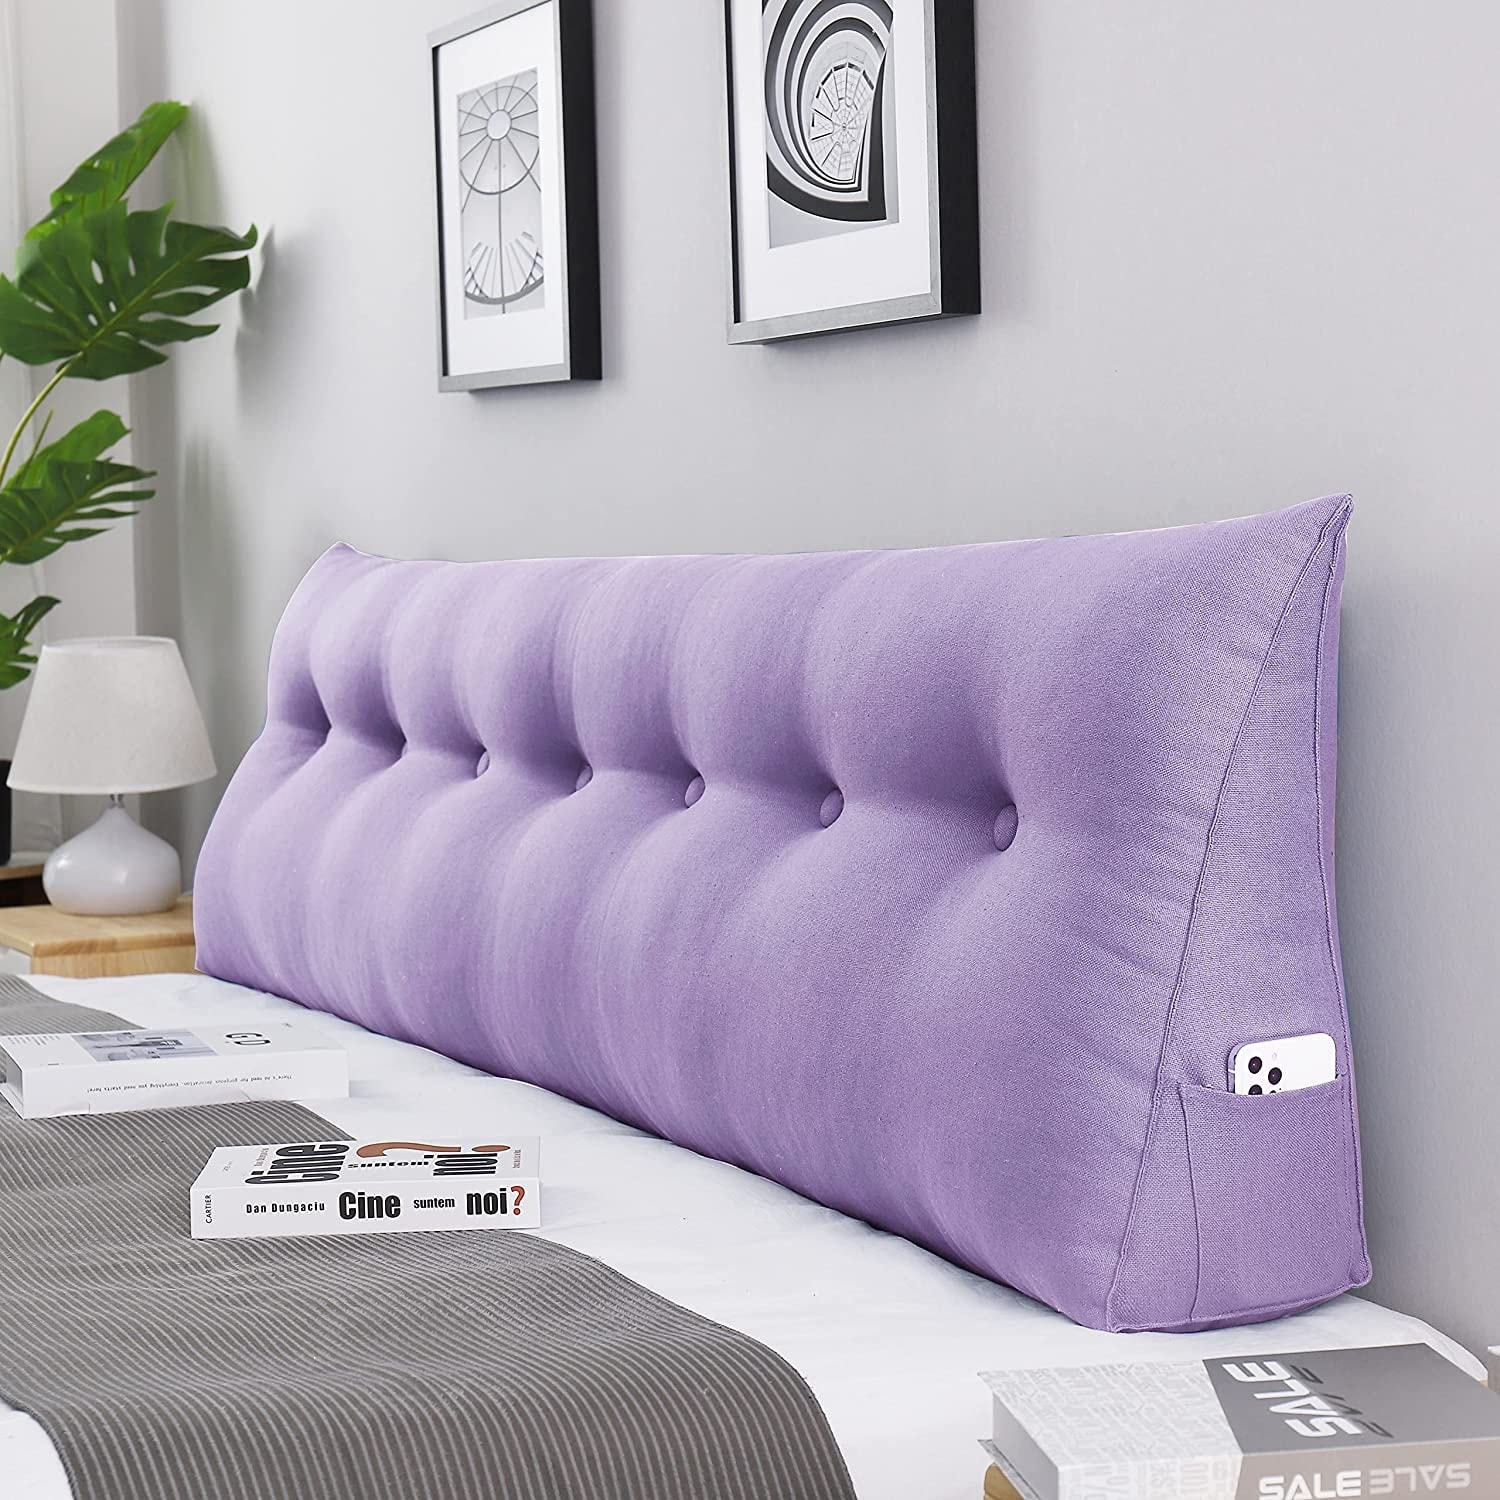 https://ak1.ostkcdn.com/images/products/is/images/direct/6bfa78d6b9fd7d4ccb7148a00b00d1fcca72c699/WOWMAX-Bed-Rest-Wedge-Pillow-Headboard-Reading-TV-Back-Support-Cushion.jpg